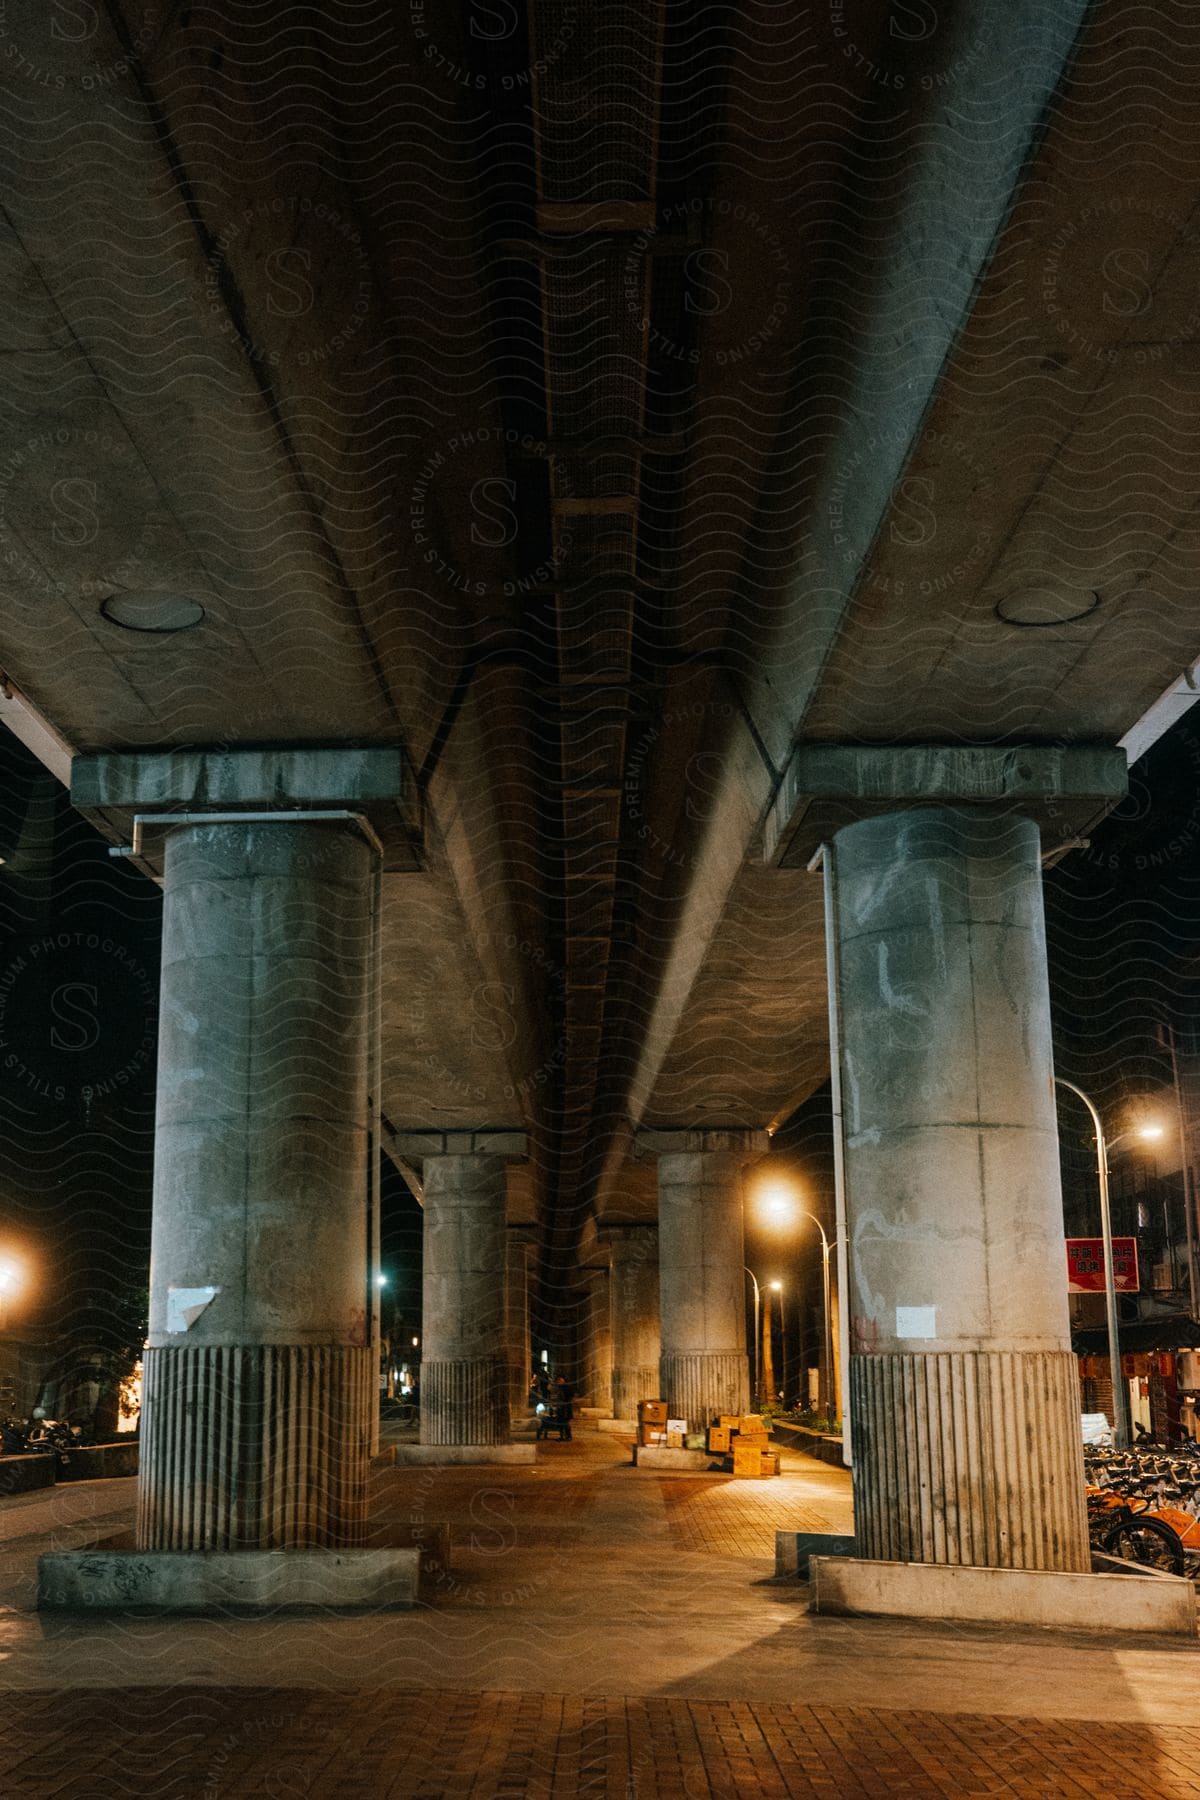 Structures of a road bridge in the urban city.